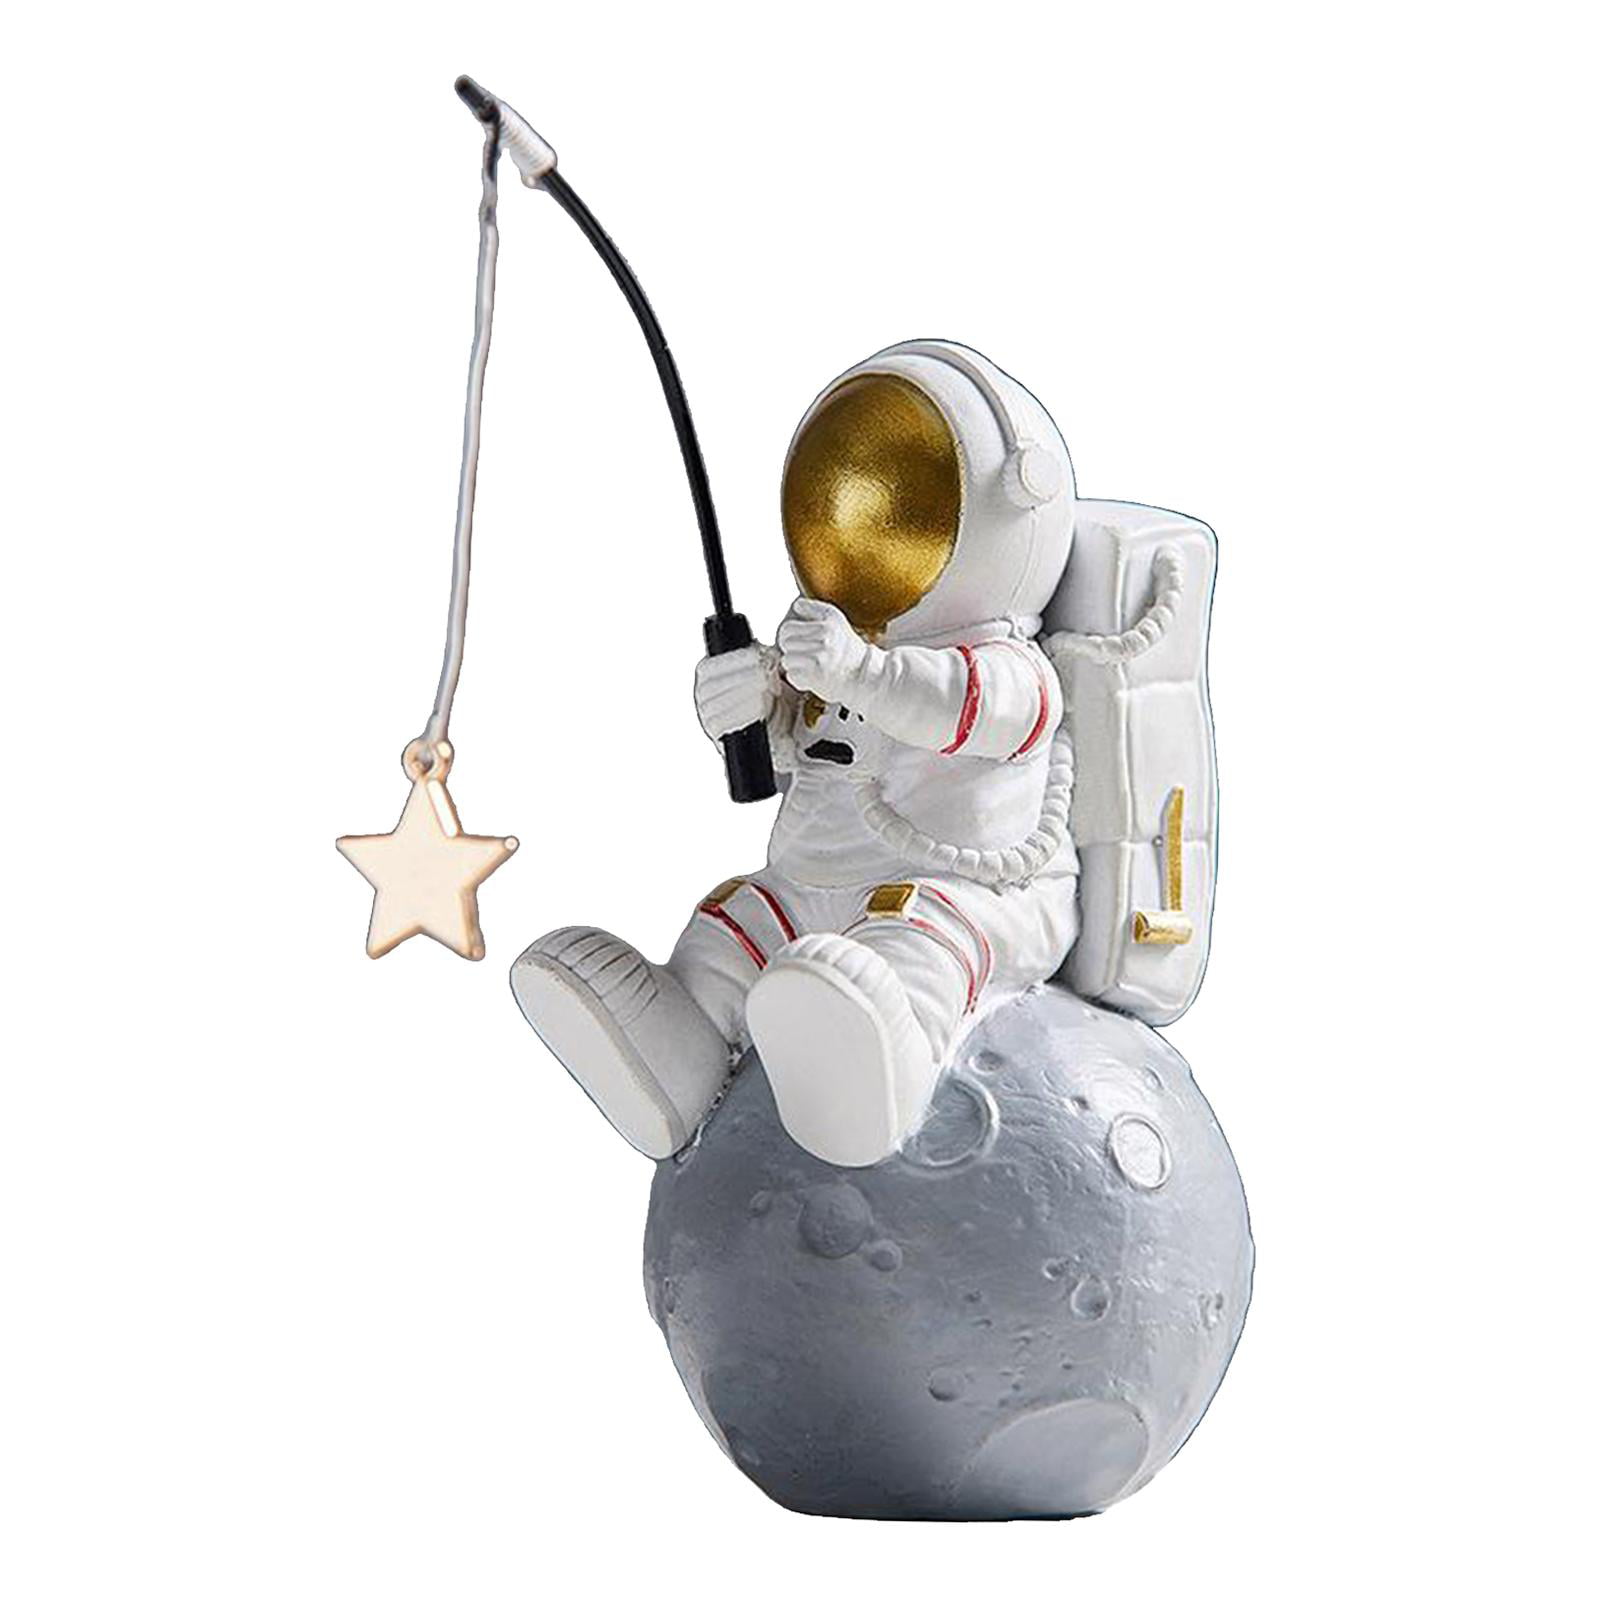 Resin Astronaut Figurines Home Decor Spaceman Collectible Ornament Crafts 